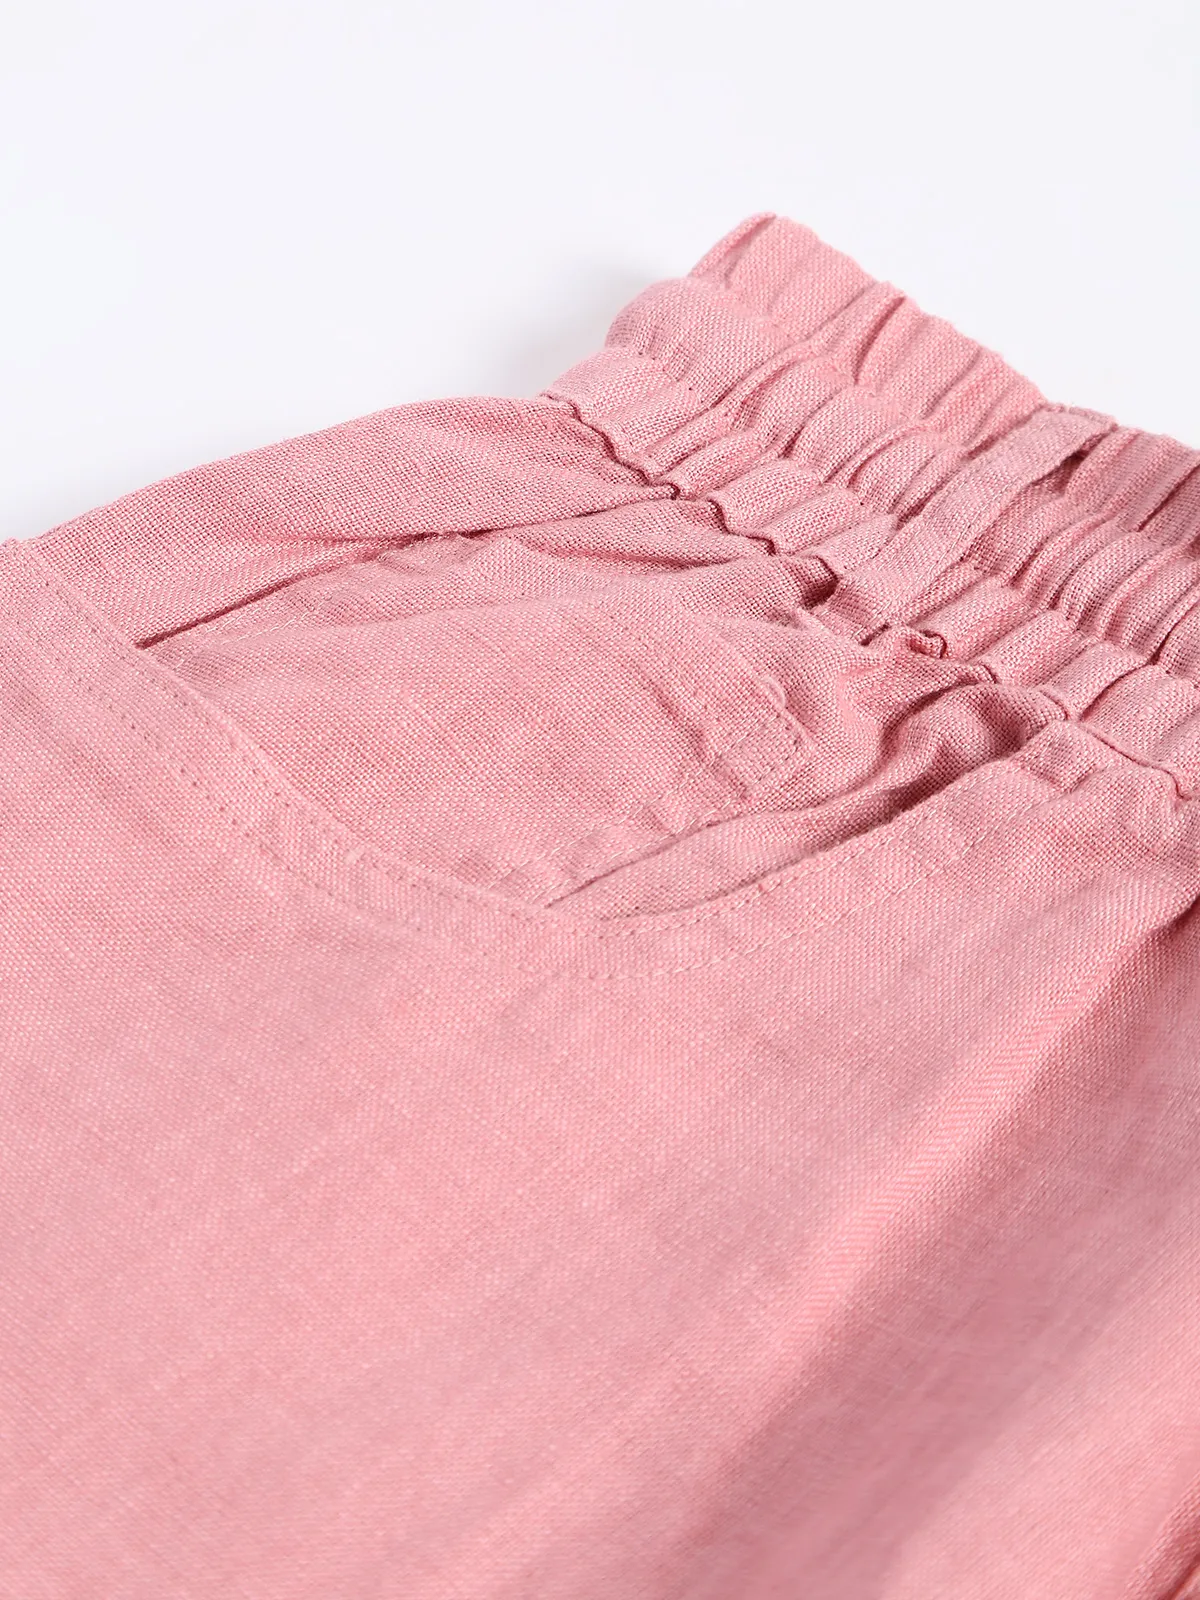 Boom pink cotton ankle length pant